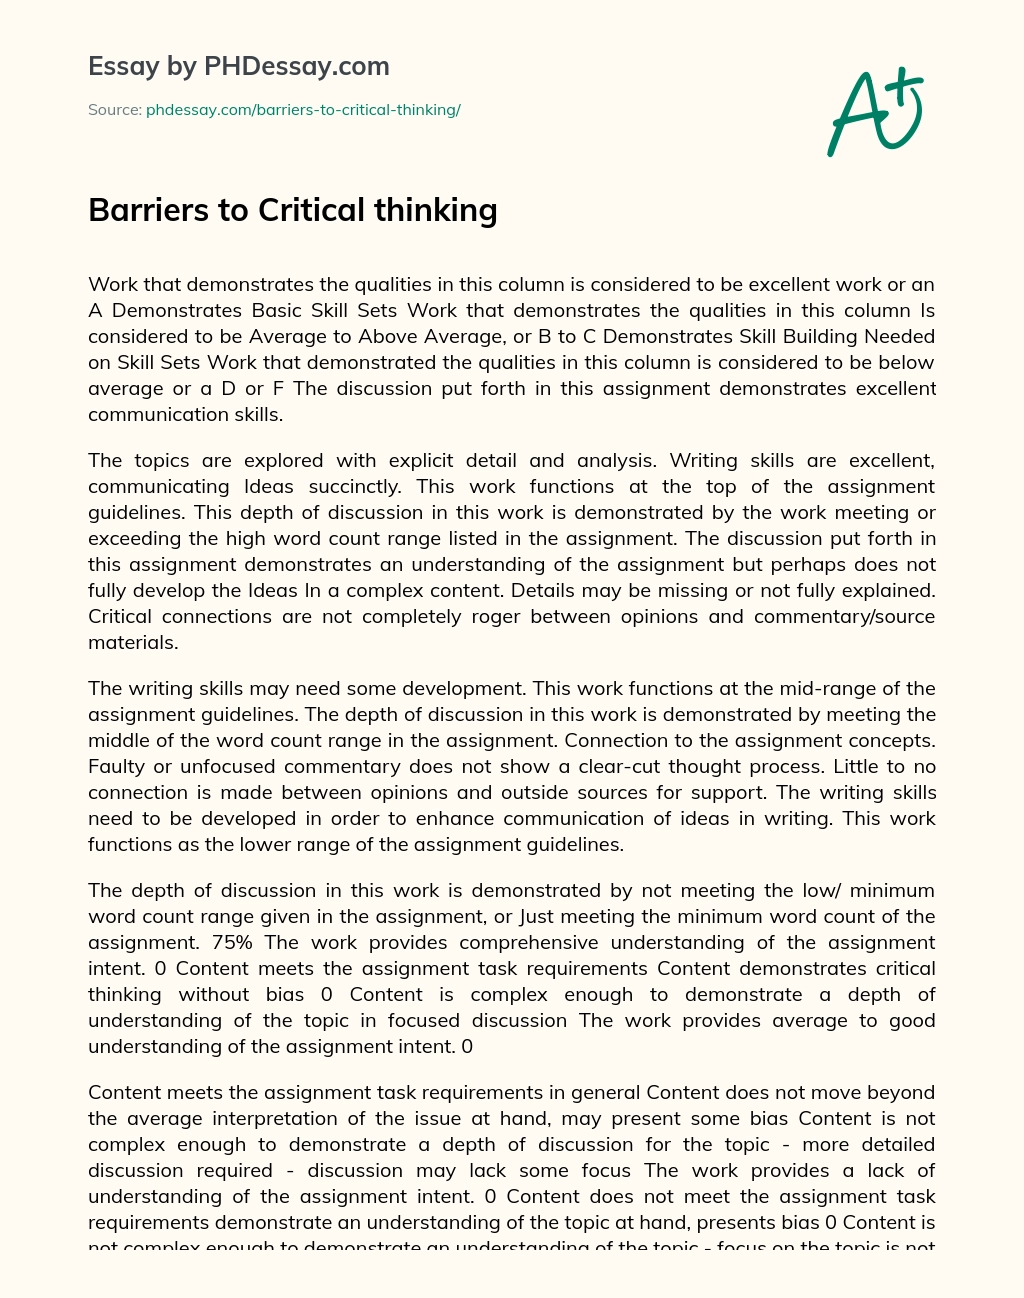 Barriers to Critical thinking essay